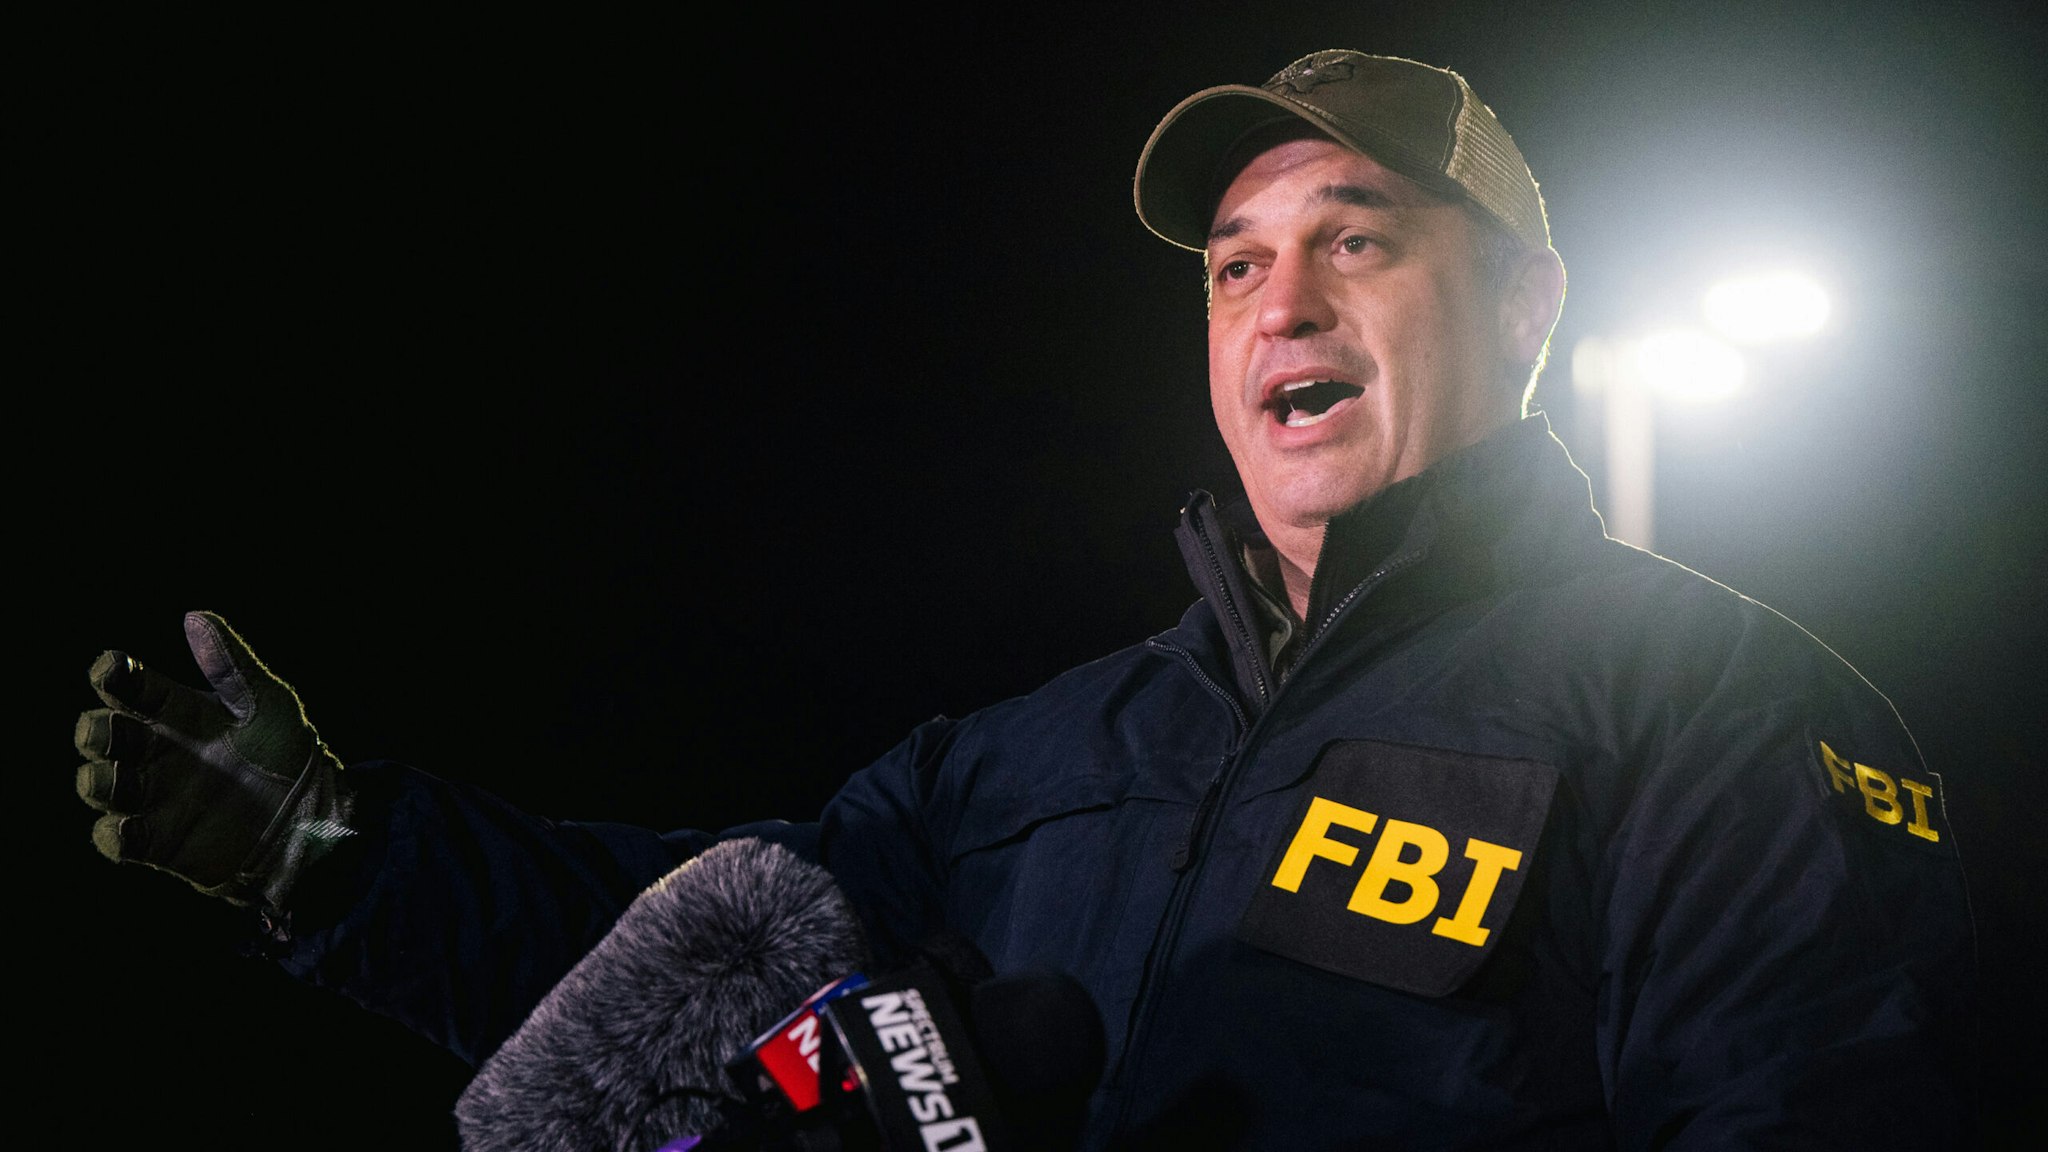 COLLEYVILLE, TEXAS - JANUARY 15: FBI Special Agent In Charge Matthew DeSarno speaks at a news conference near the Congregation Beth Israel synagogue on January 15, 2022 in Colleyville, Texas. All four people who were held hostage at the Congregation Beth Israel synagogue have been safely released after more than 10 hours of being held captive by a gunman. Earlier this morning, police responded to a hostage situation after reports of a man with a gun was holding people captive.